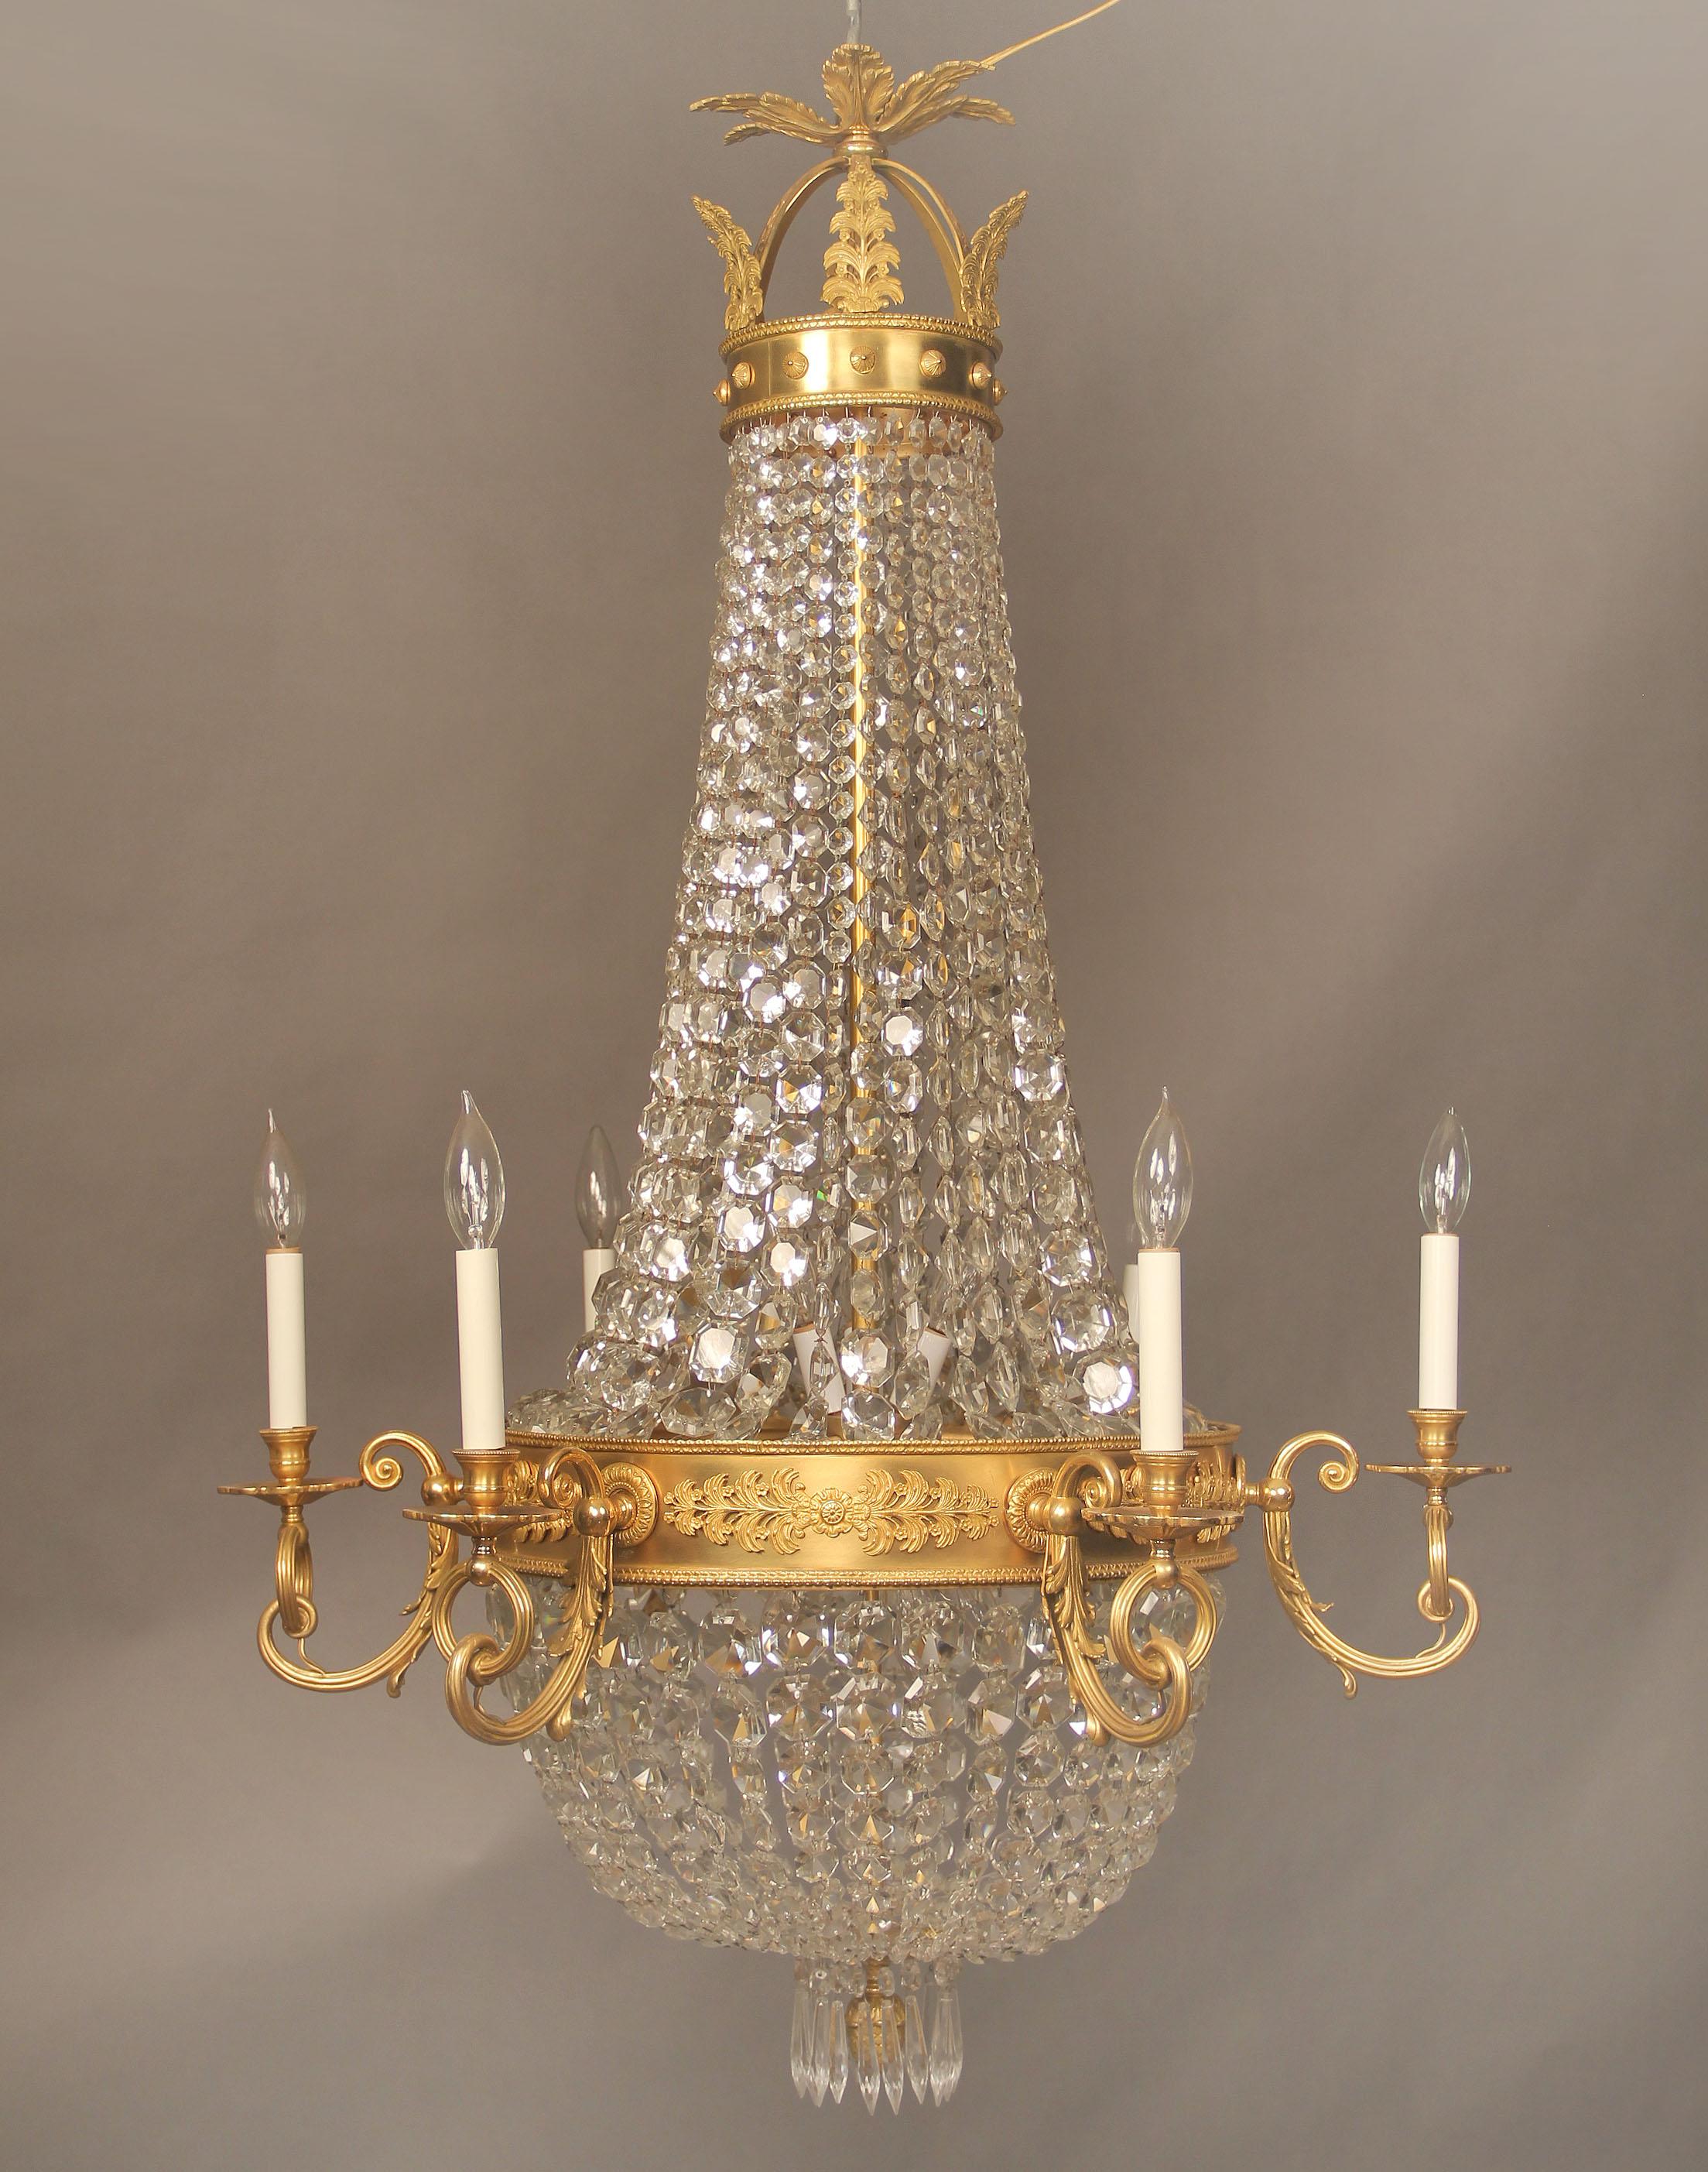 A stunning late 19th century gilt bronze and crystal Russian style fourteen-light basket chandelier.

Foliate bronze designs along the crown and arms, crystal beaded basket, six perimeter and eight interior lights.